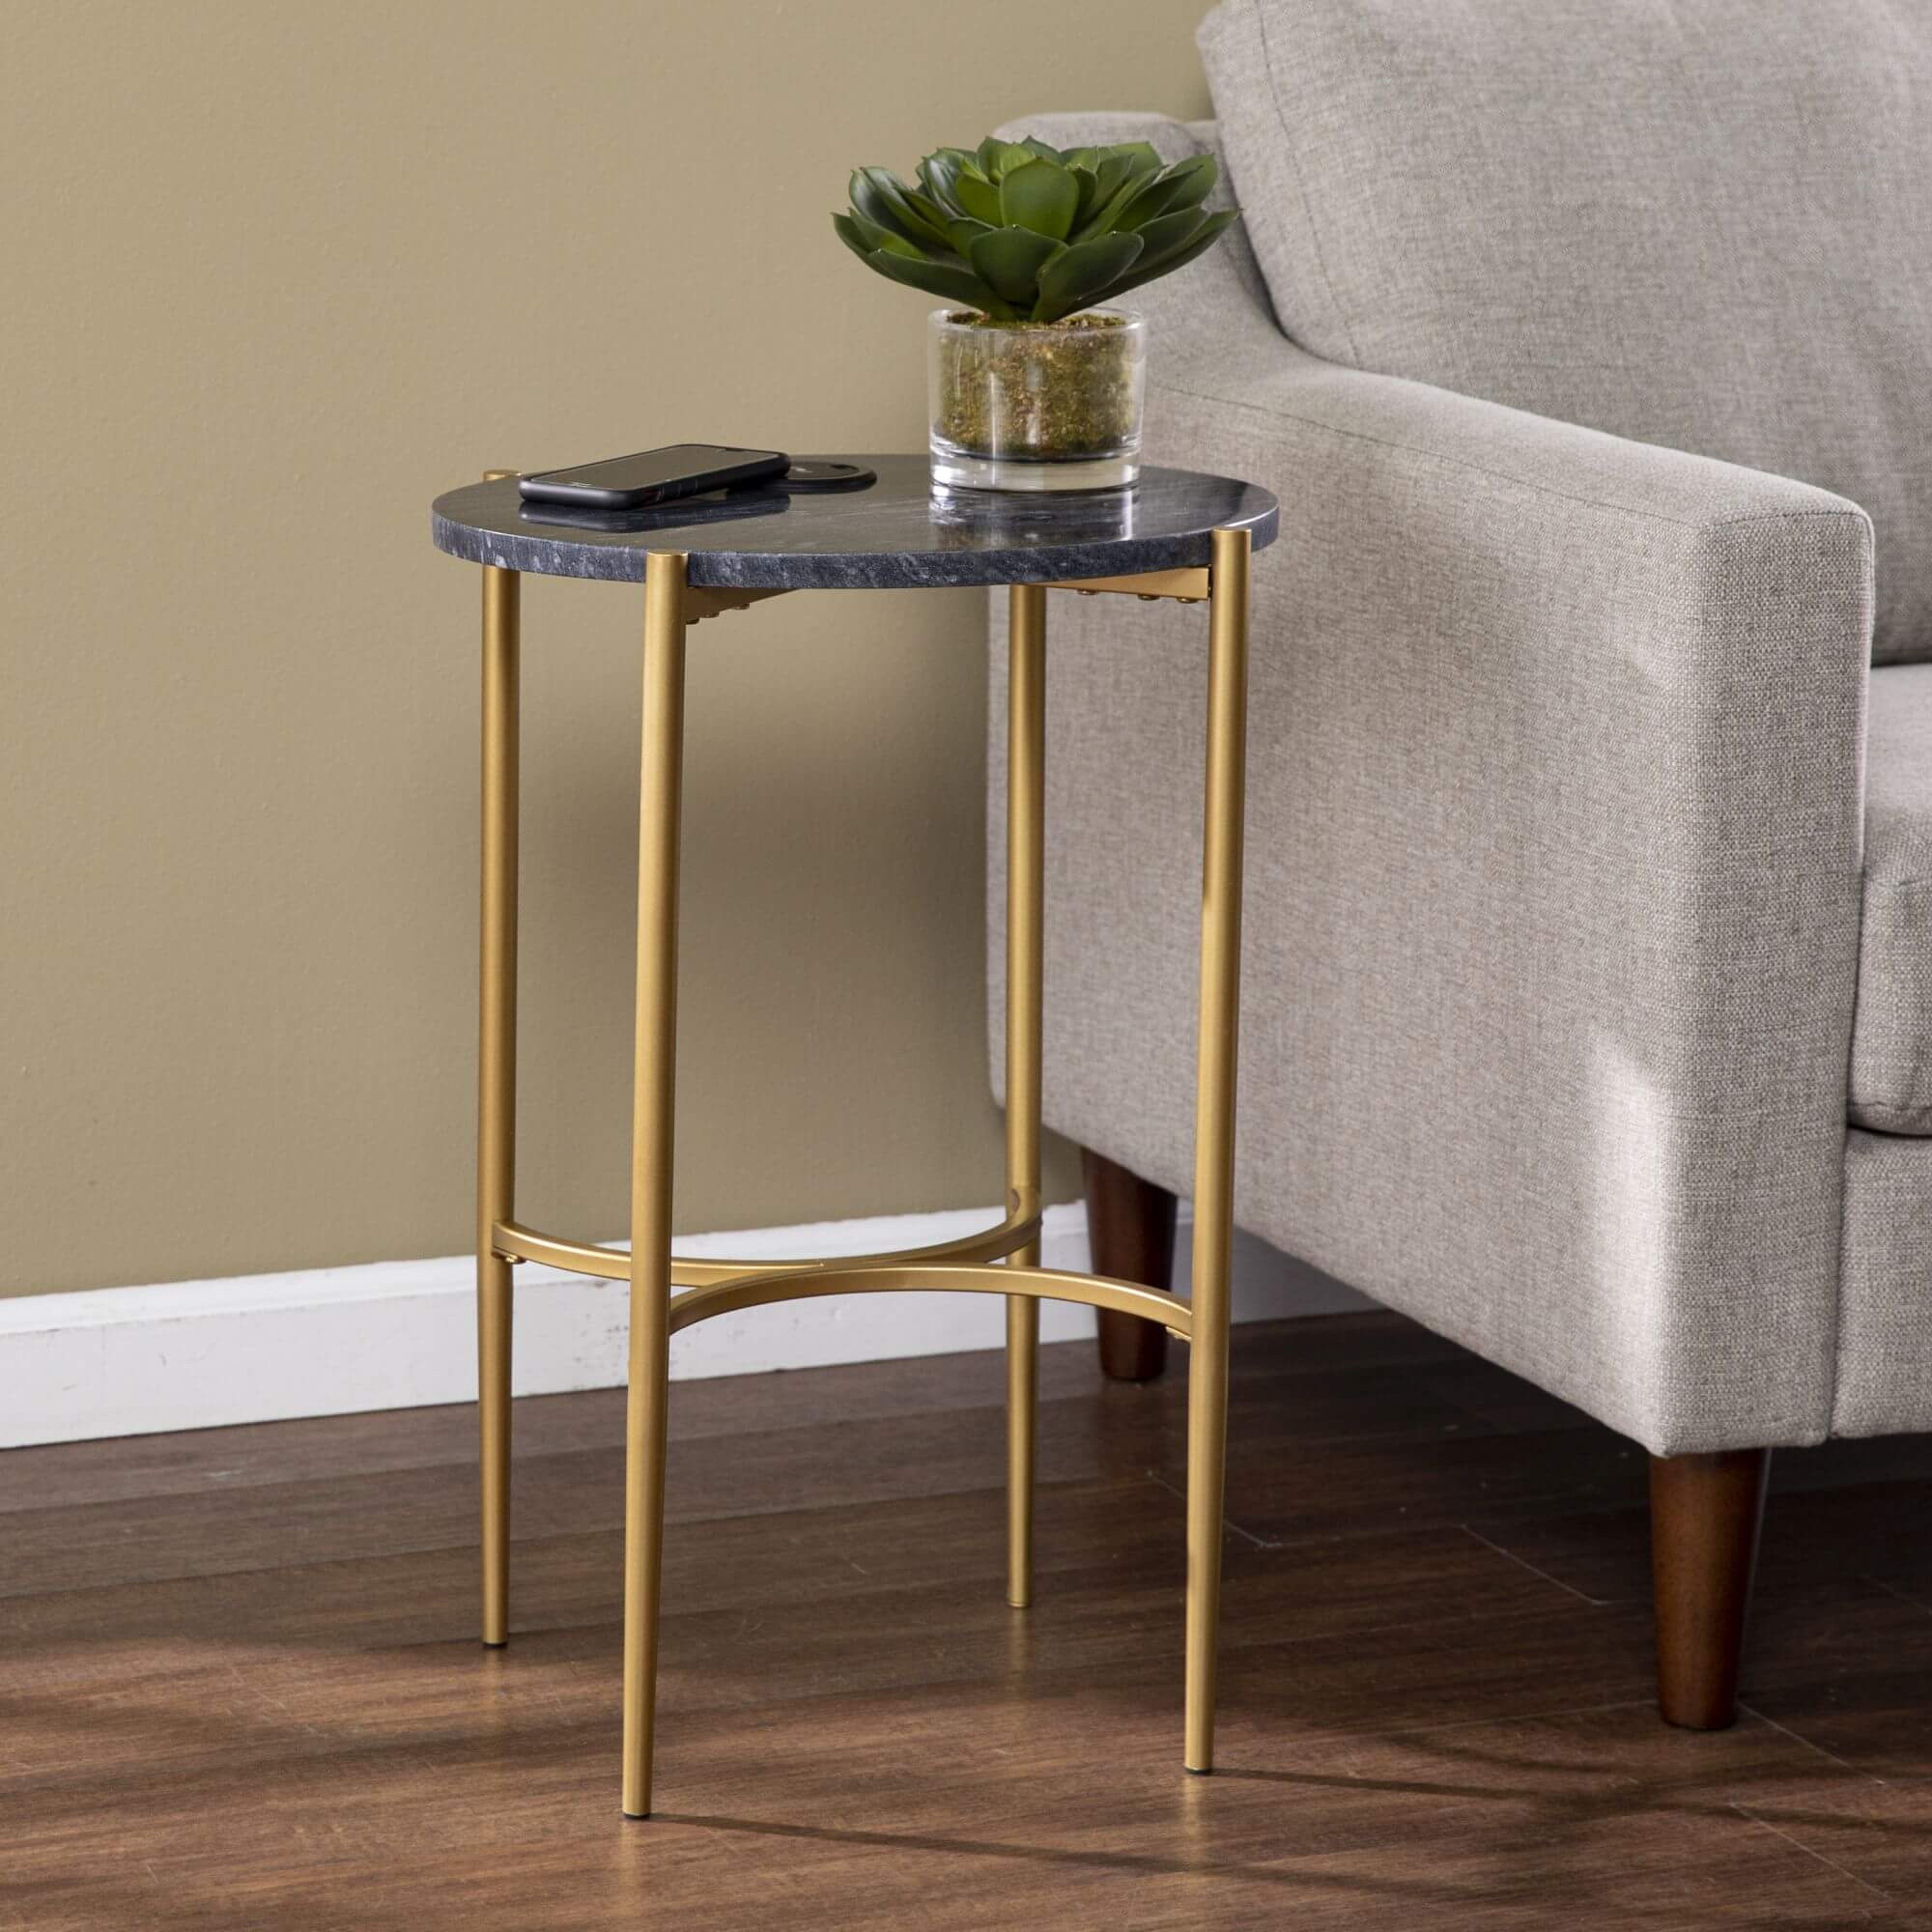 Clarvin Side Table w/ Wireless Charging Station